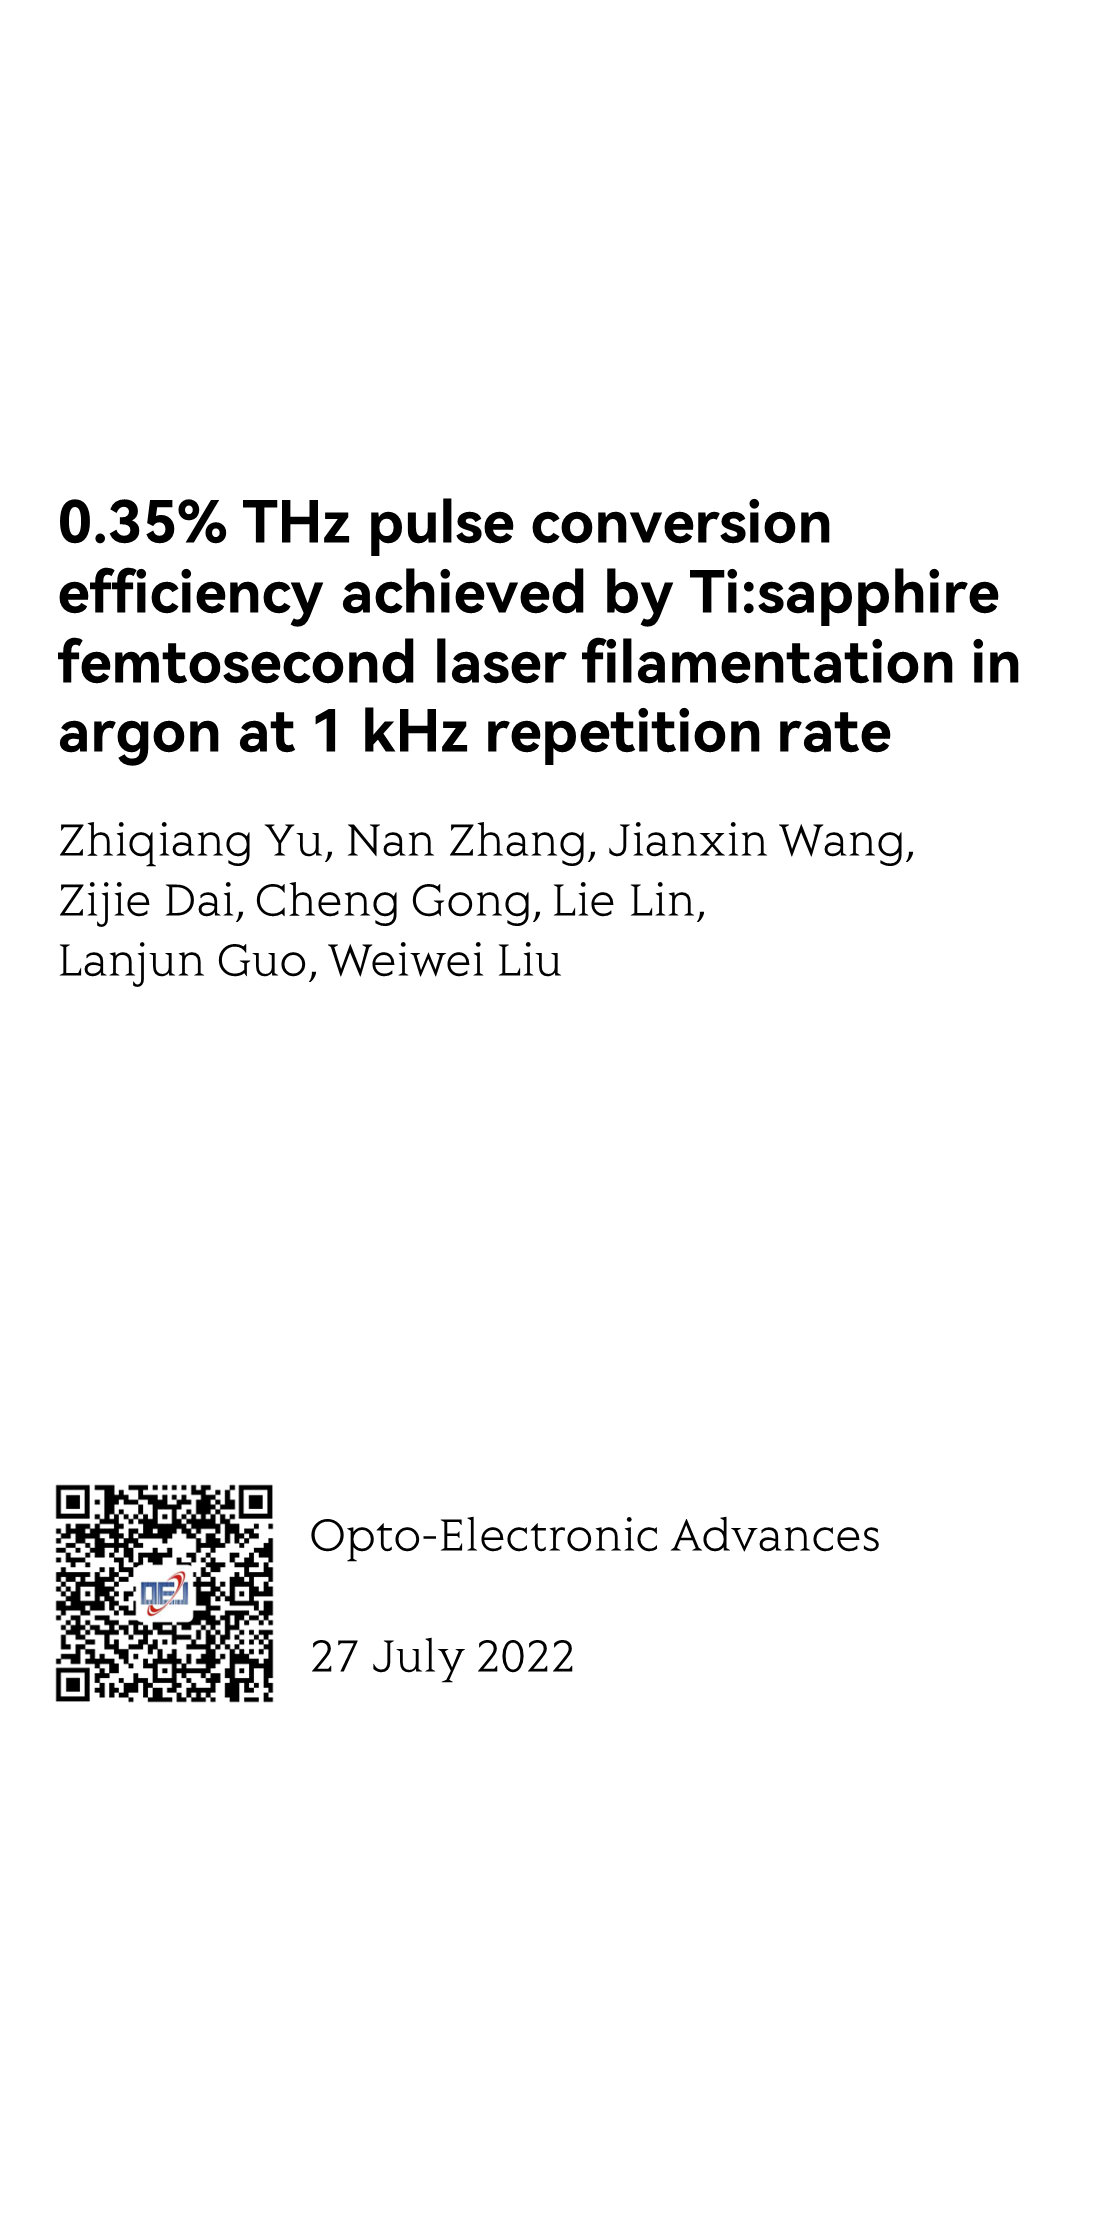 0.35% THz pulse conversion efficiency achieved by Ti:sapphire femtosecond laser filamentation in argon at 1 kHz repetition rate_1